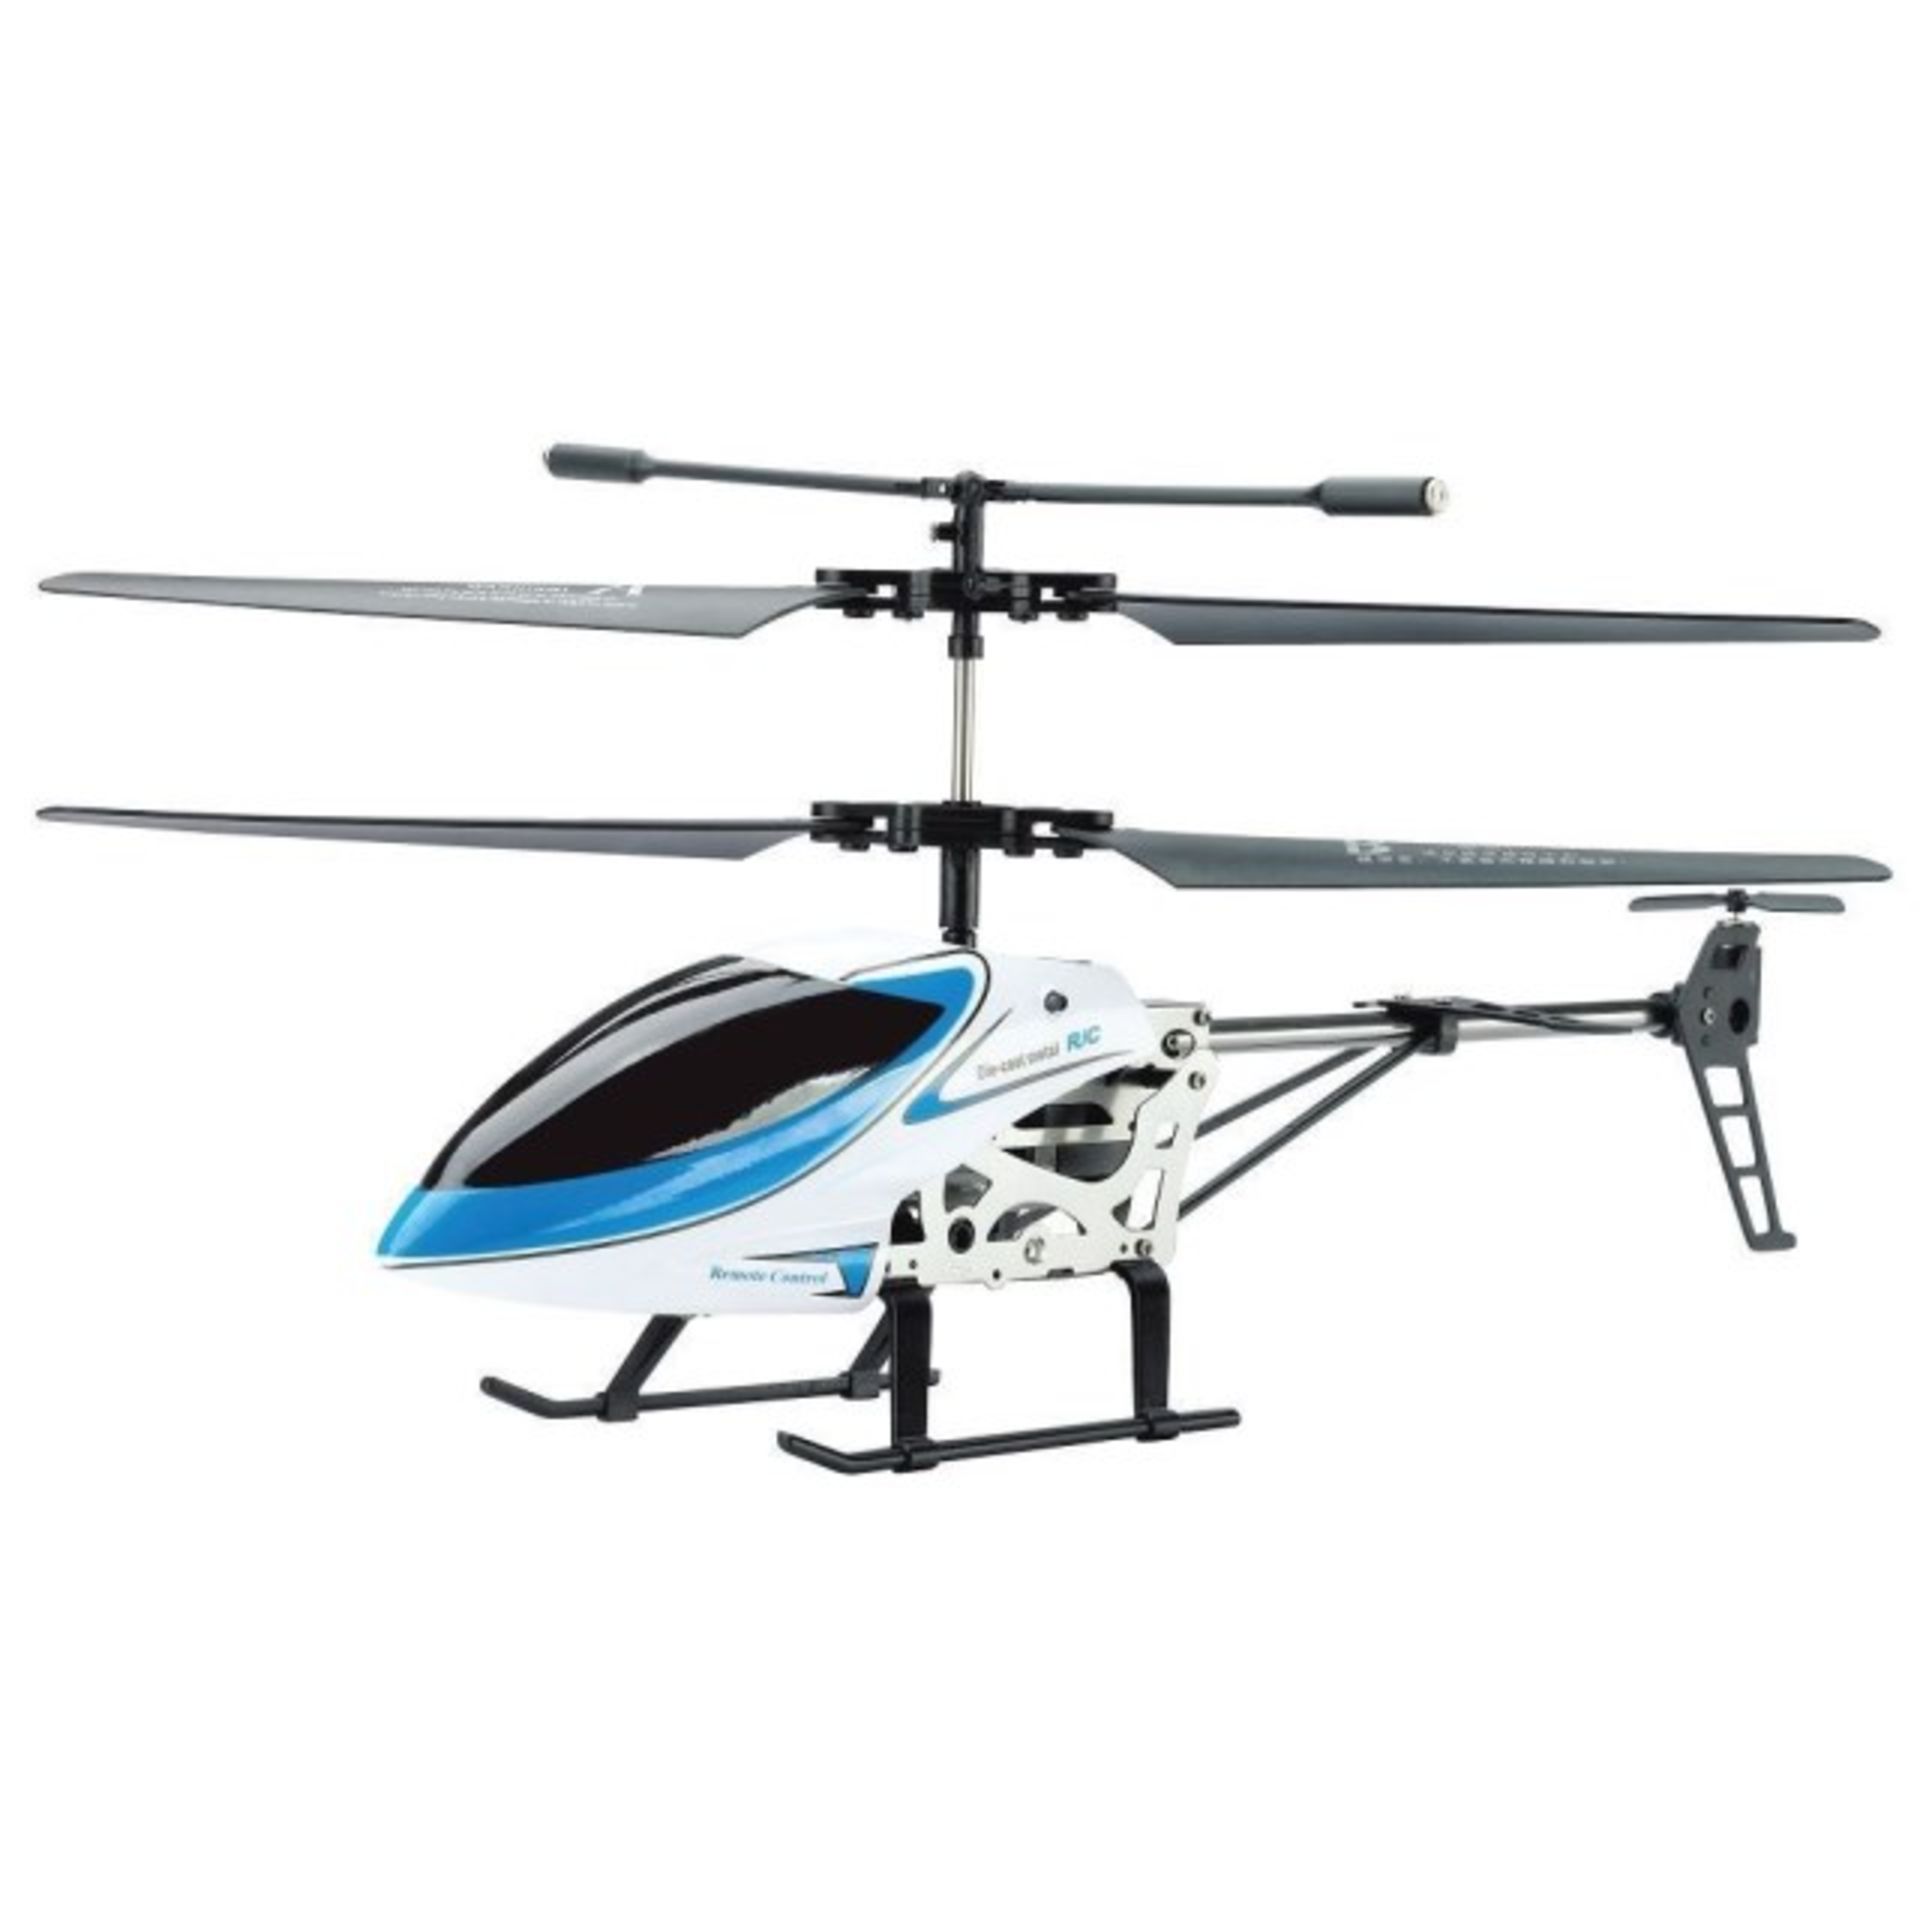 + VAT Brand New 3.5 Channel Infra-Red Control Helicopter Super Steady Rotor Blade System Die cast